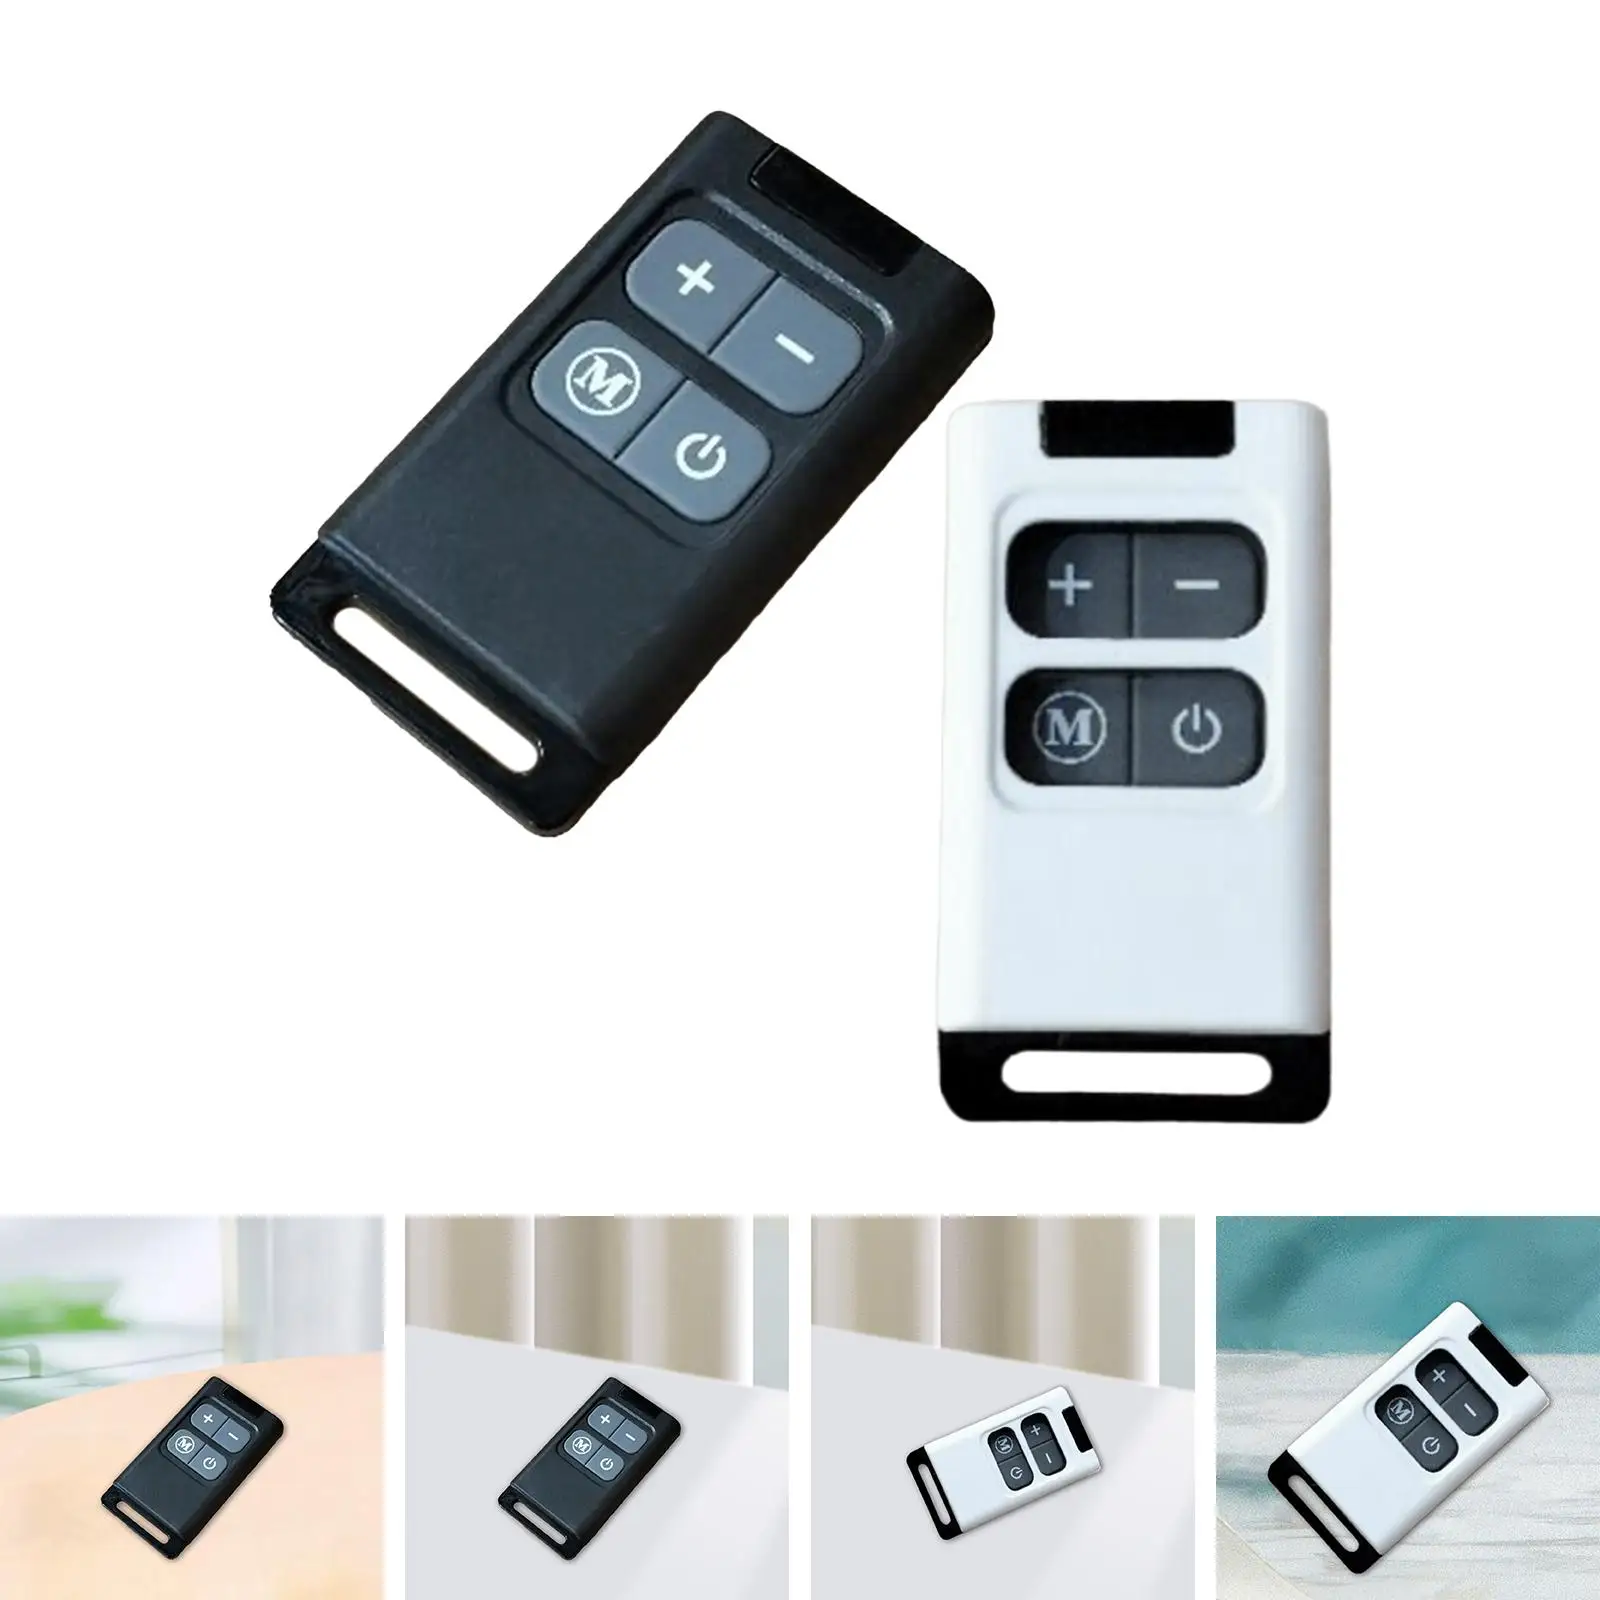 Car Parking Heater Remote Control Switch Remote Control Controller for RV Motorhomes Air Parking Heater Vehicle Automotive